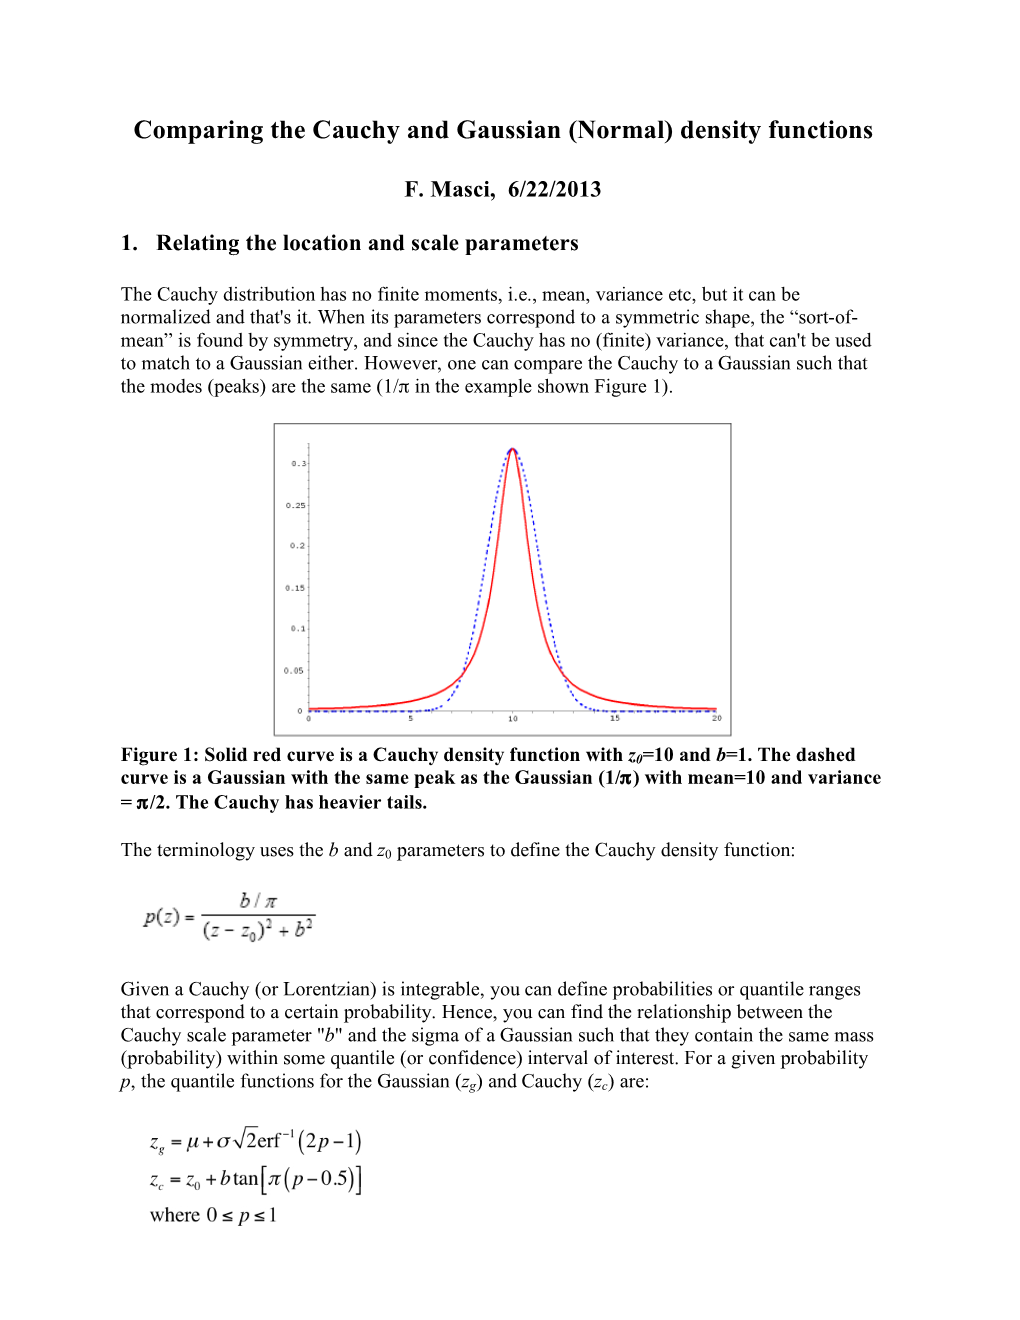 Comparing the Cauchy and Gaussian (Normal) Density Functions